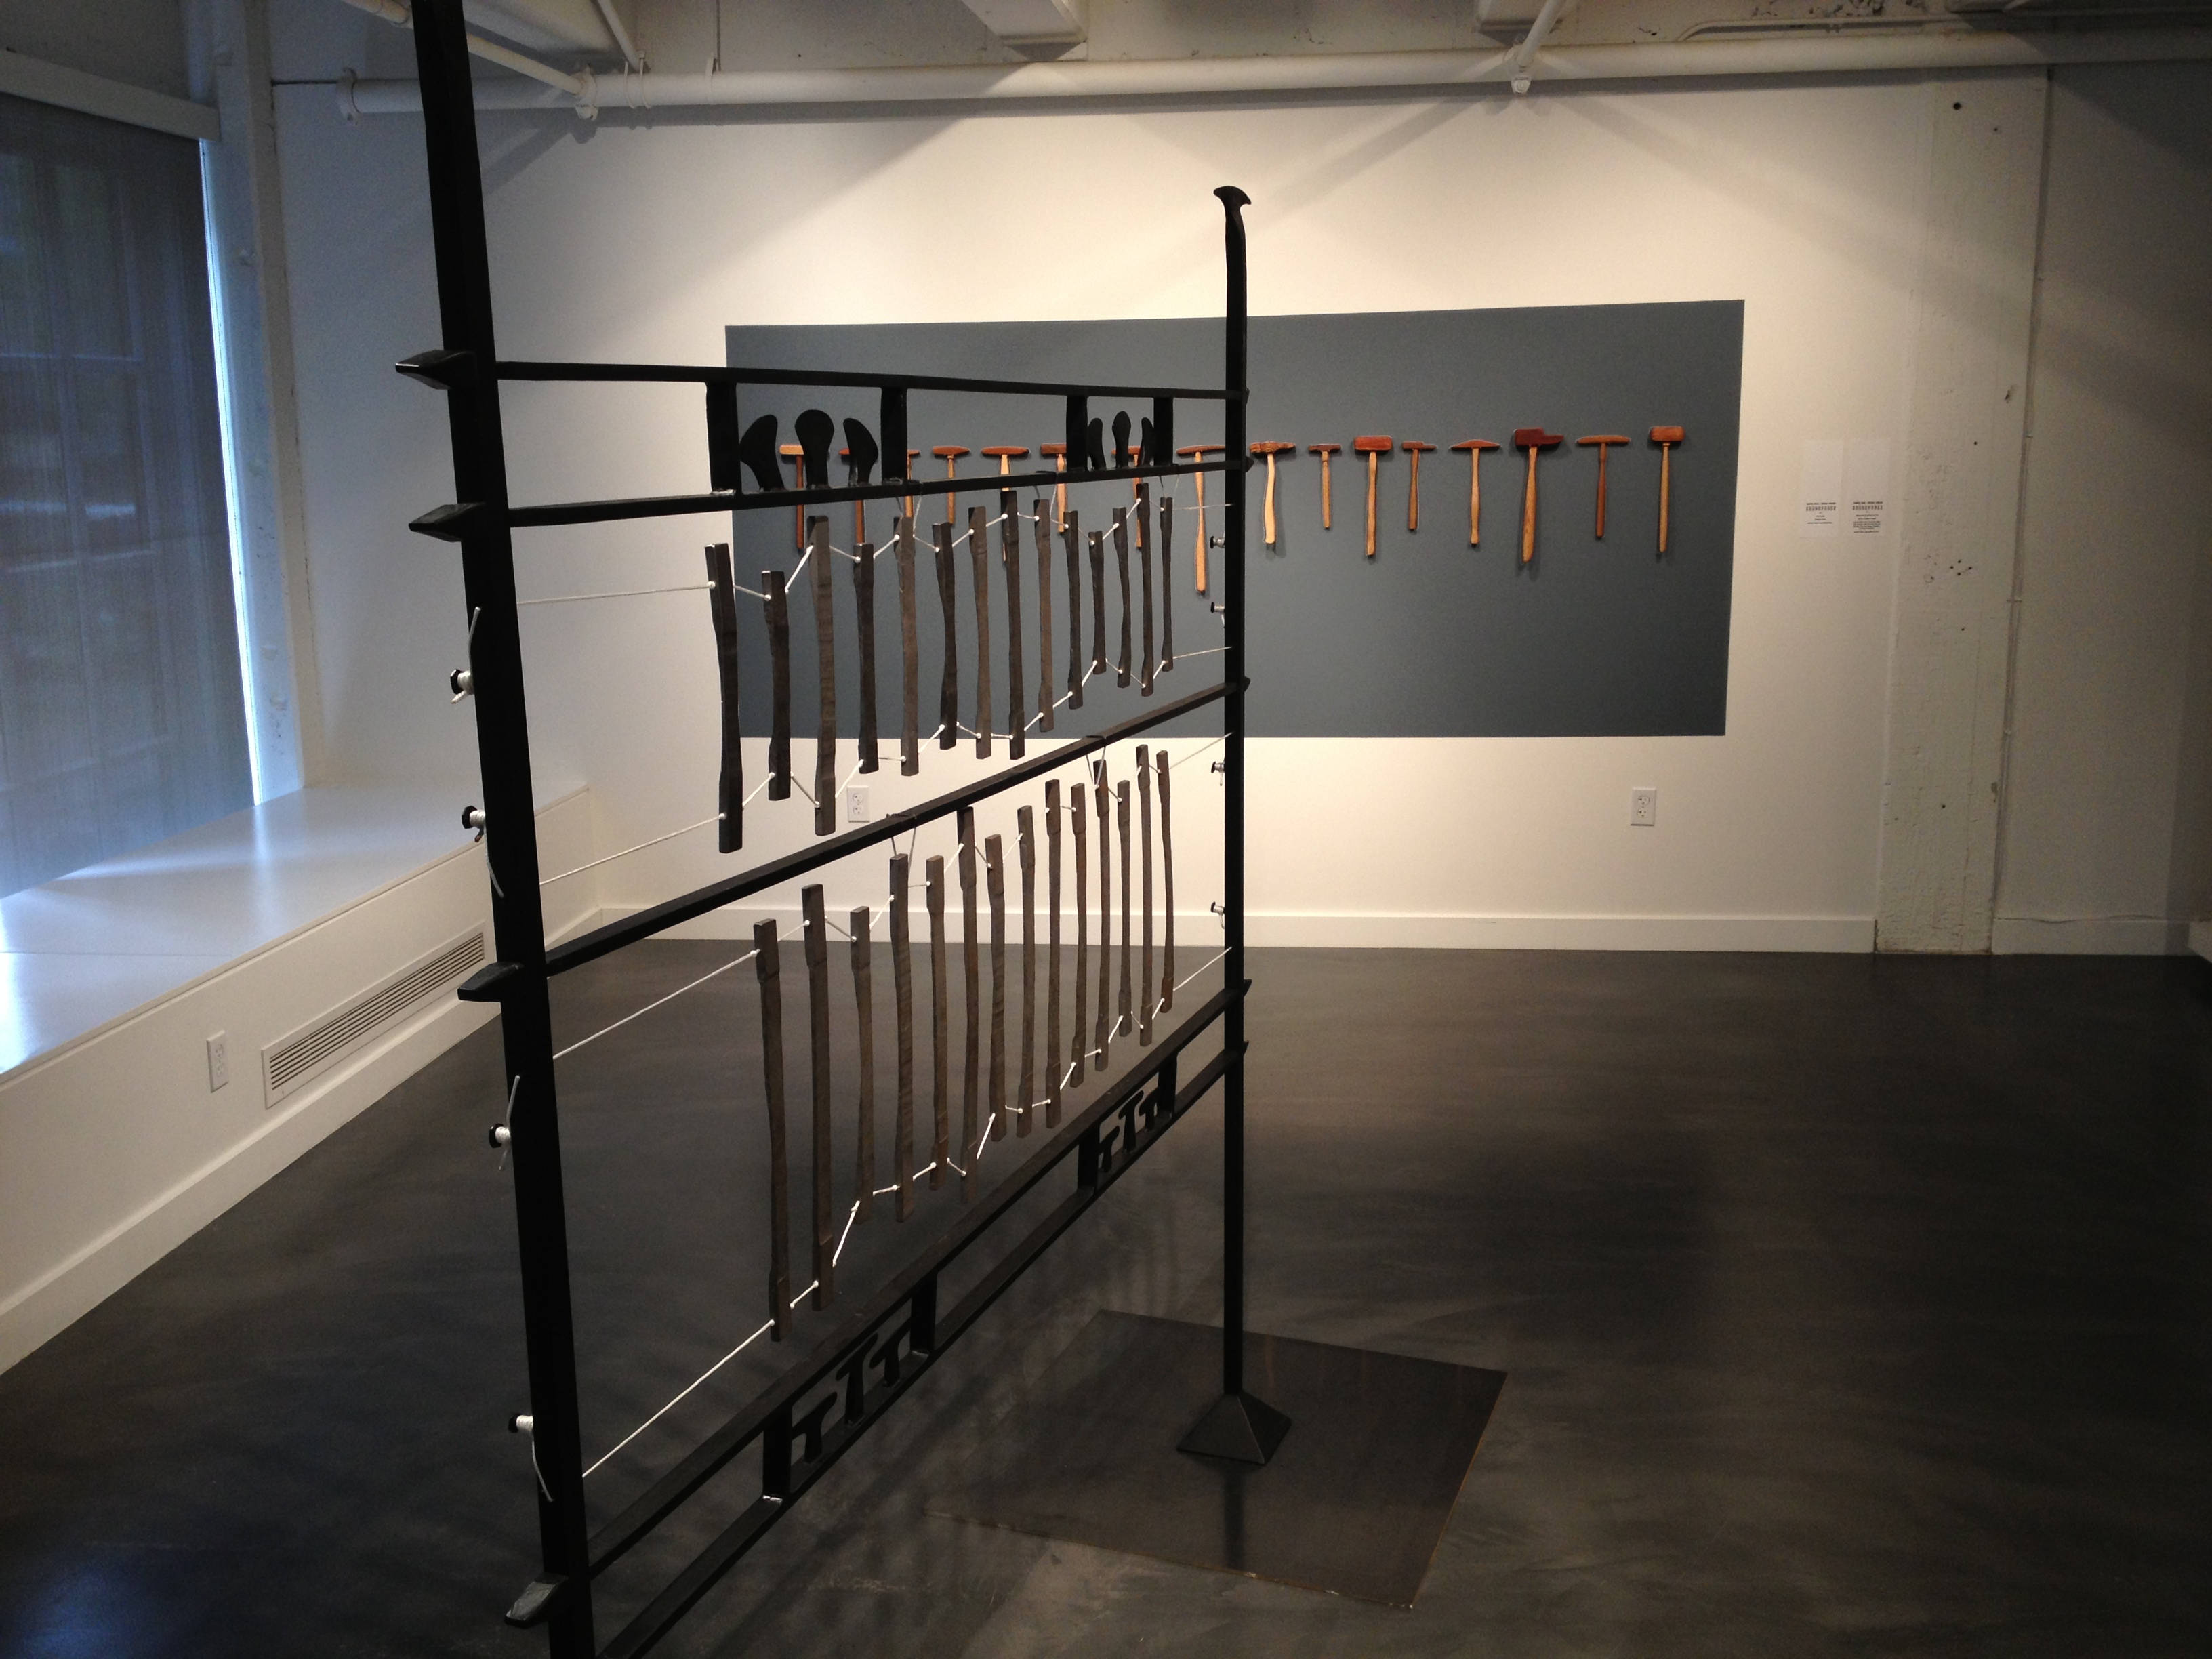 Soundforge, at the Museum of Contemporary Craft 